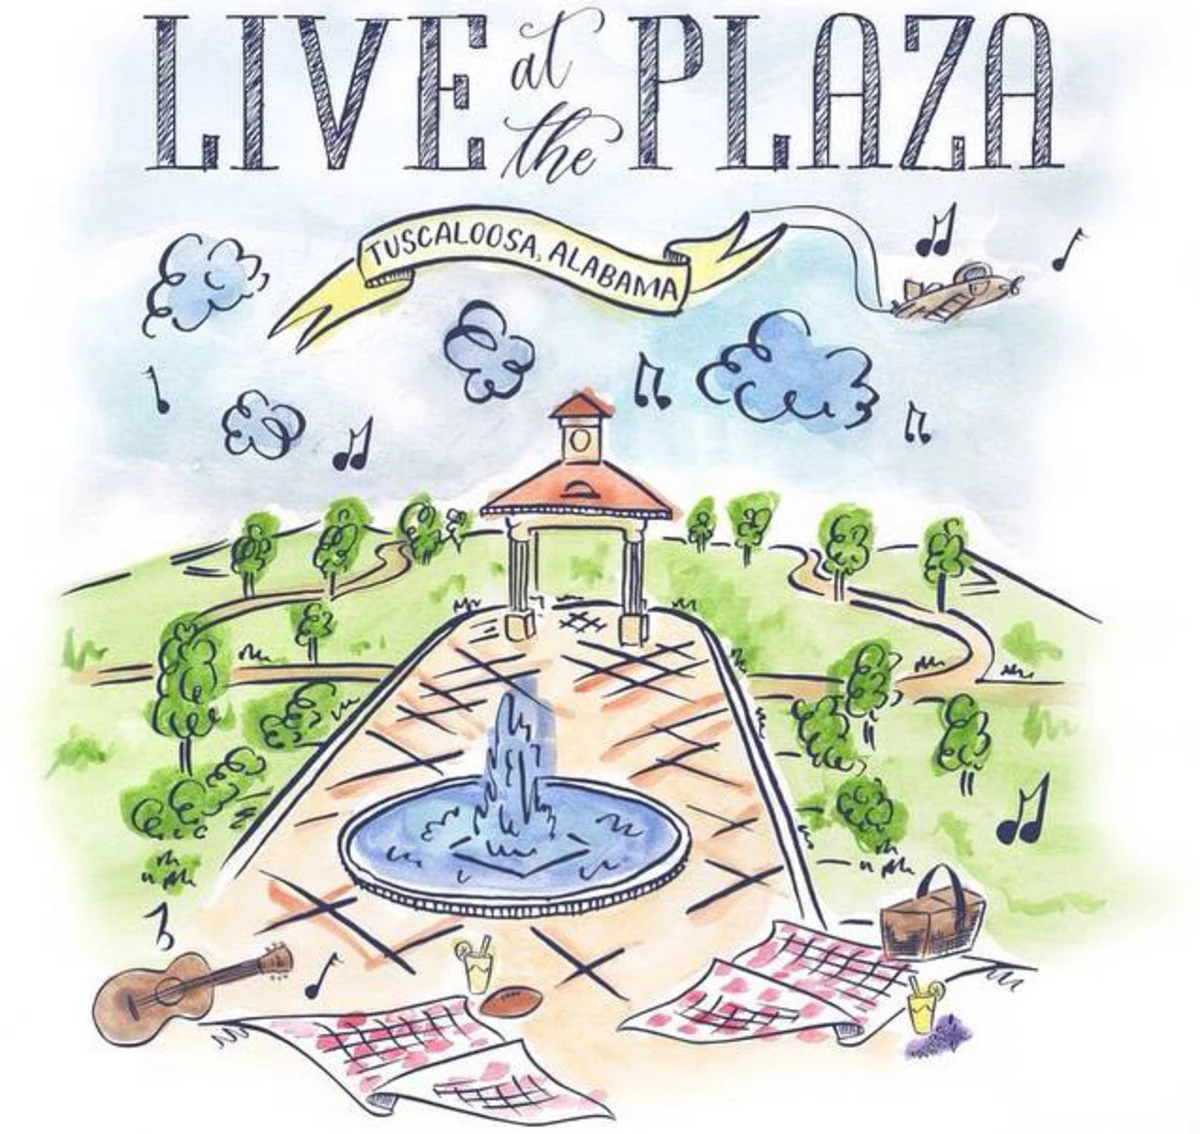 Live at the Plaza is back for it’s 5 season!